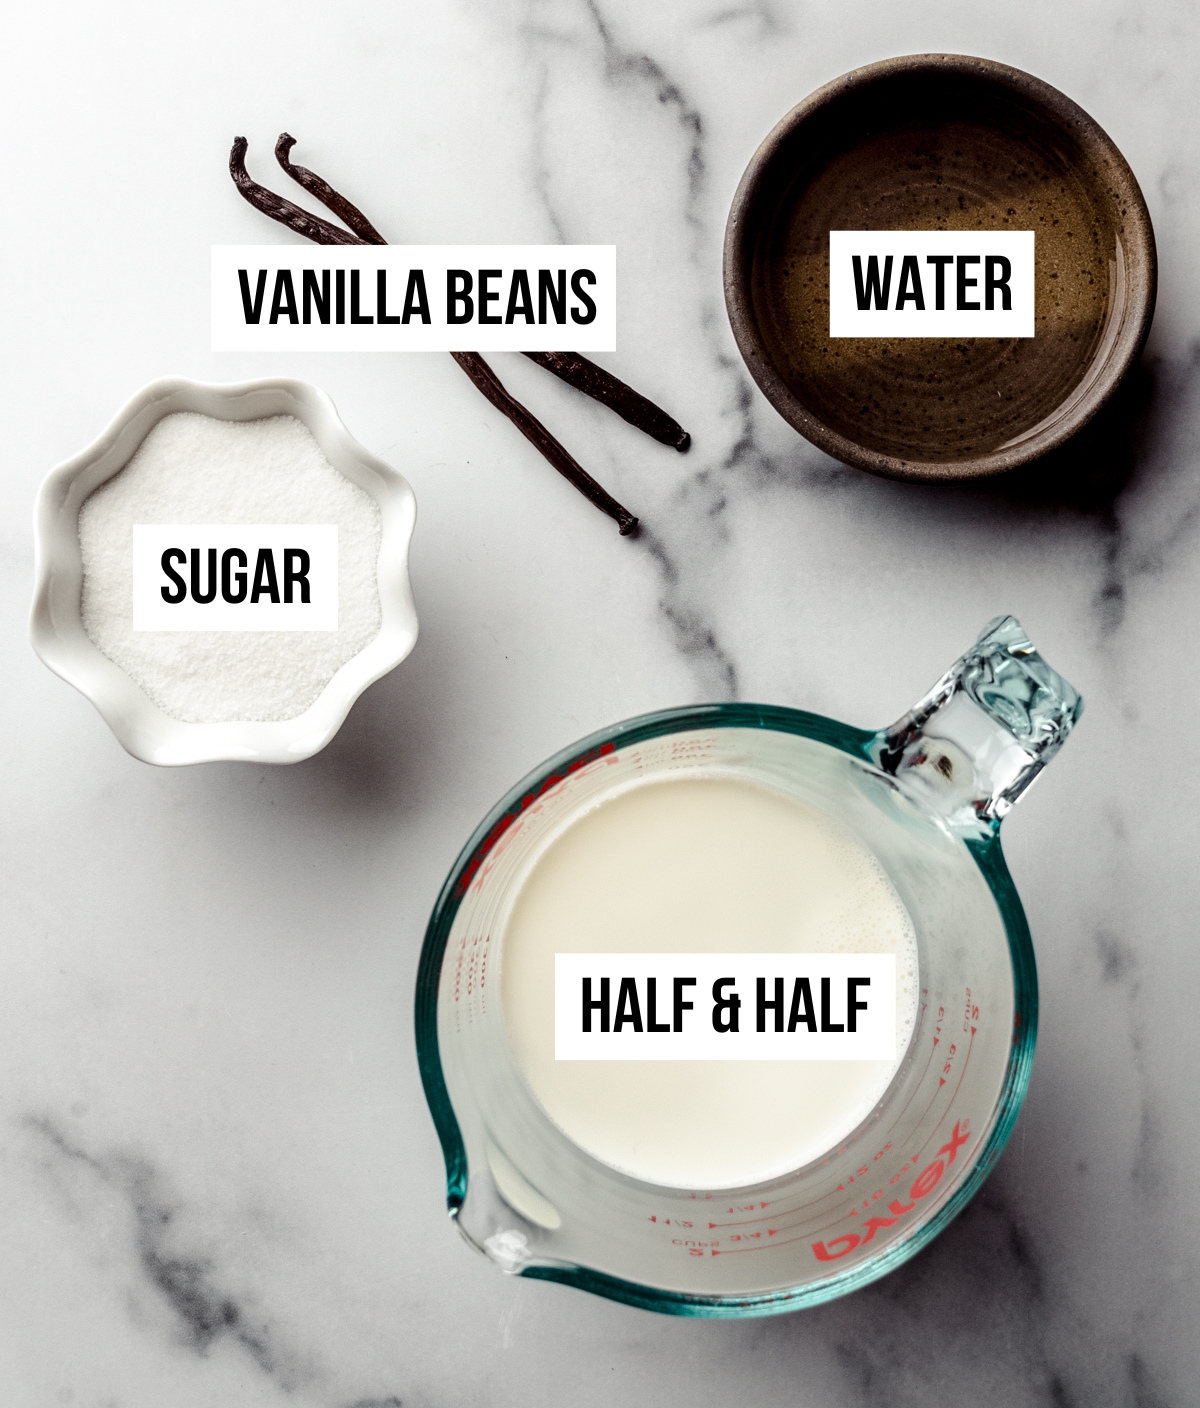 Aerial photo of ingredients for French vanilla creamer with text overlay.